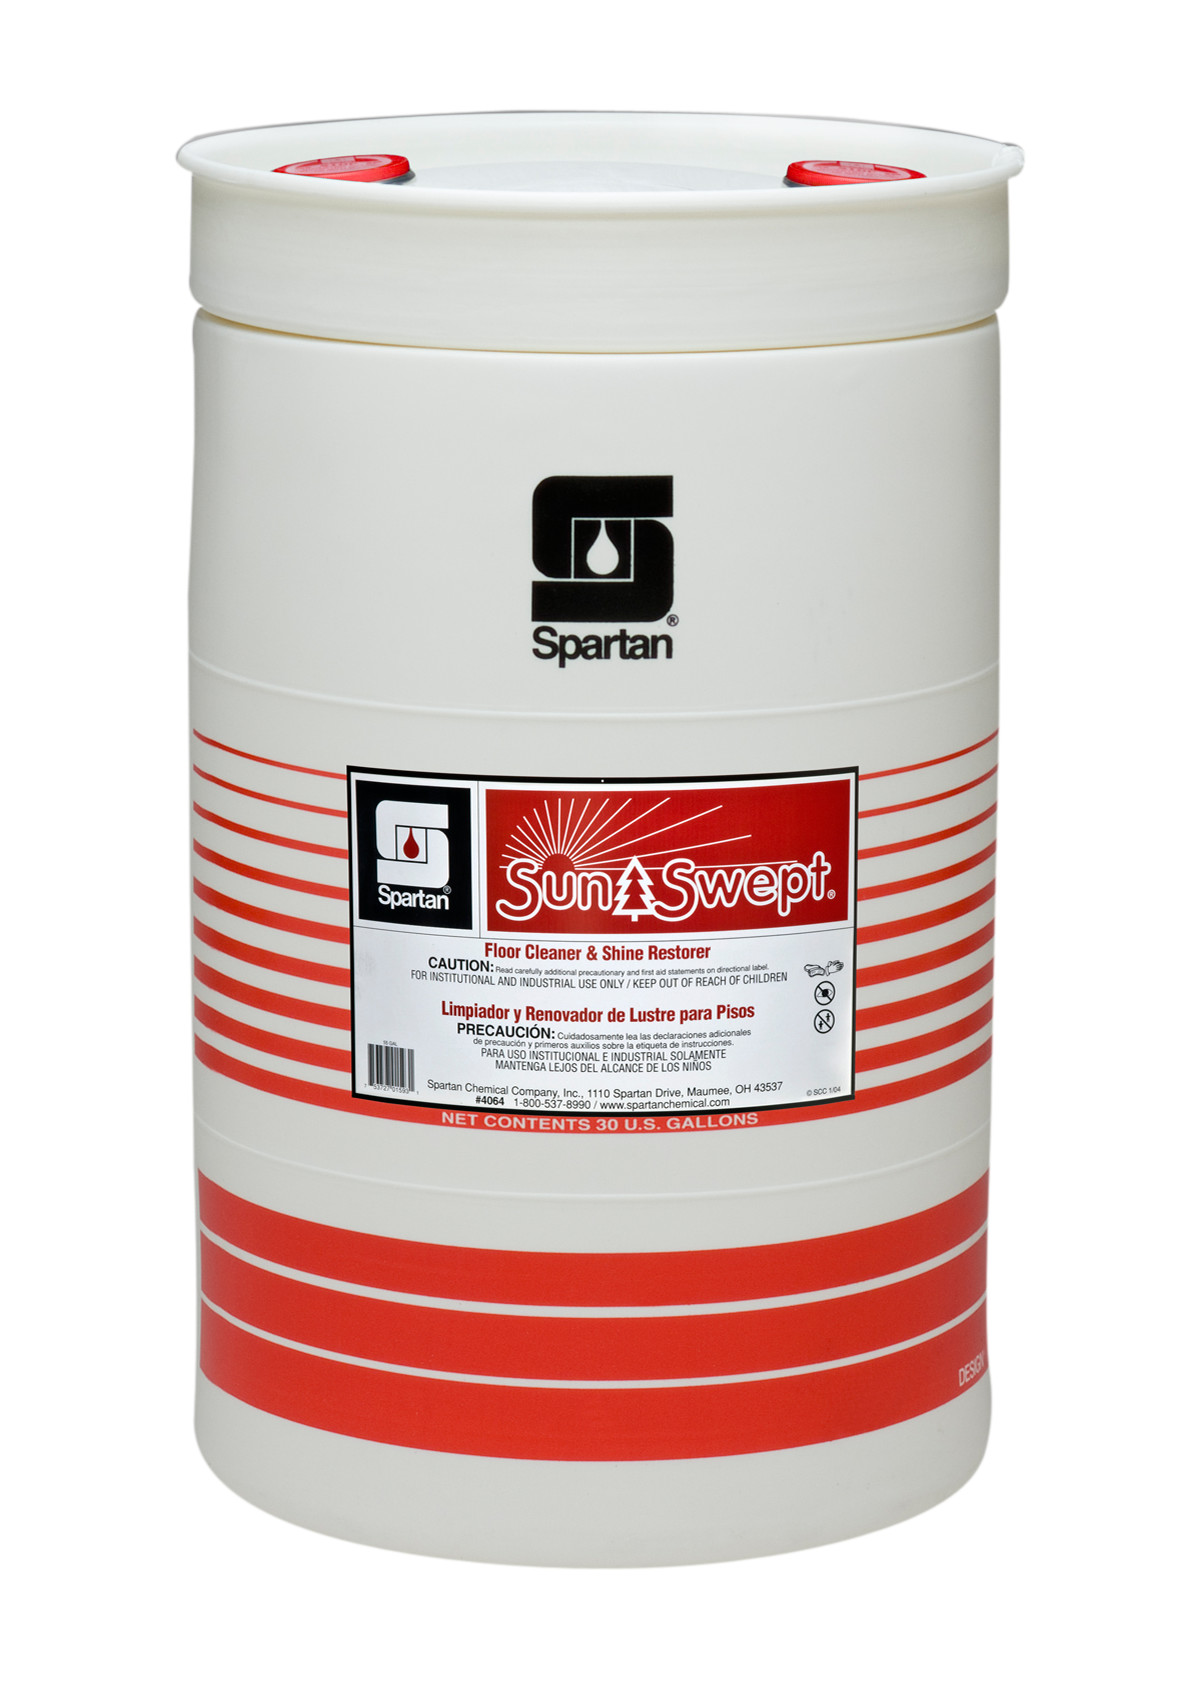 Spartan Chemical Company SunSwept, 30 GAL DRUM